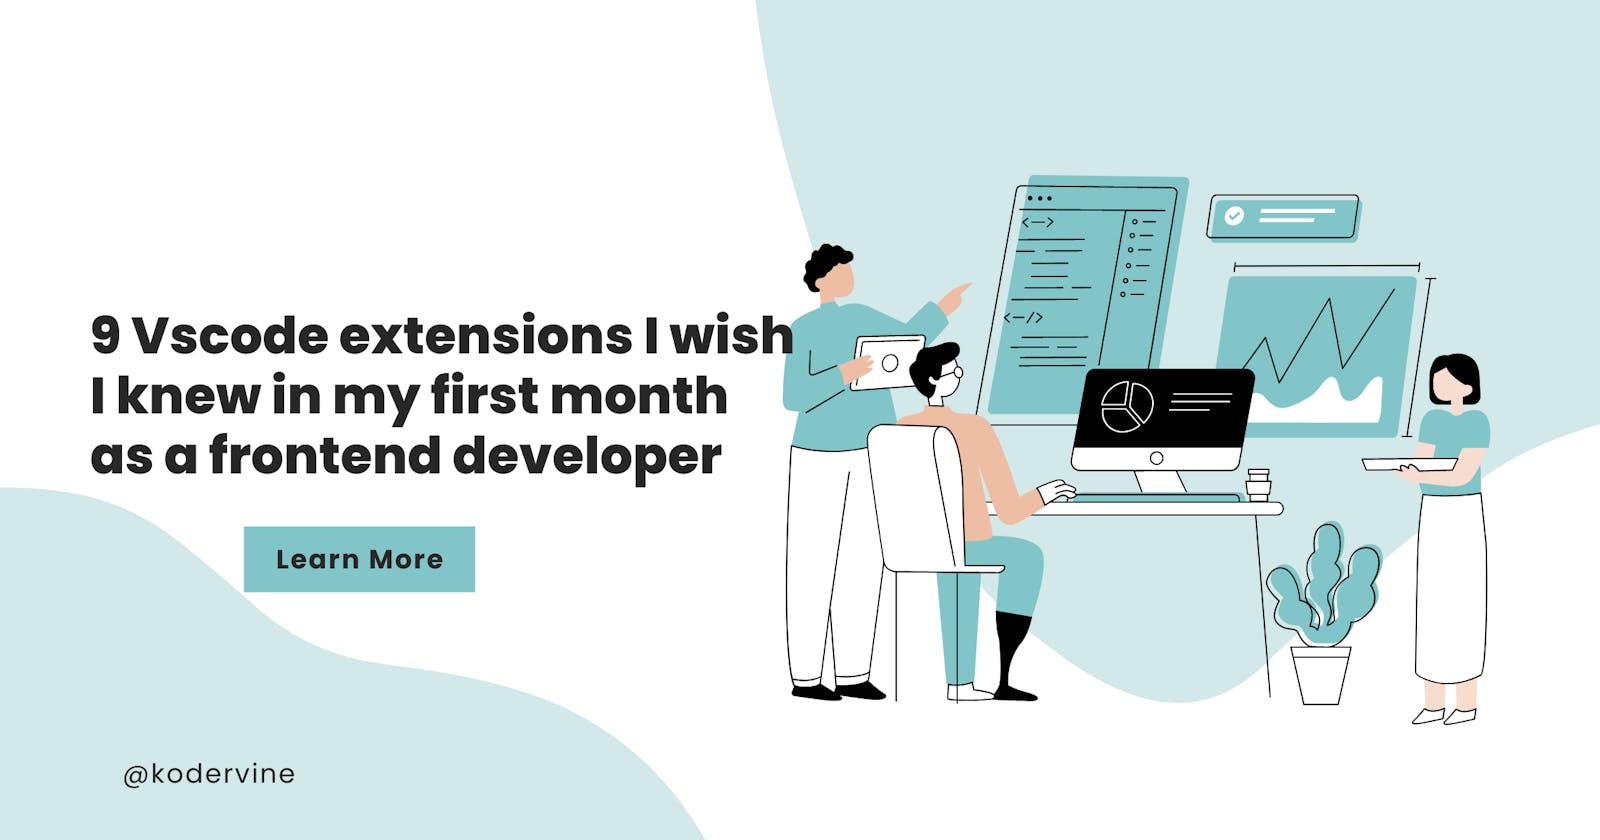 9 Vscode extensions I wish I knew in my first month as a frontend developer